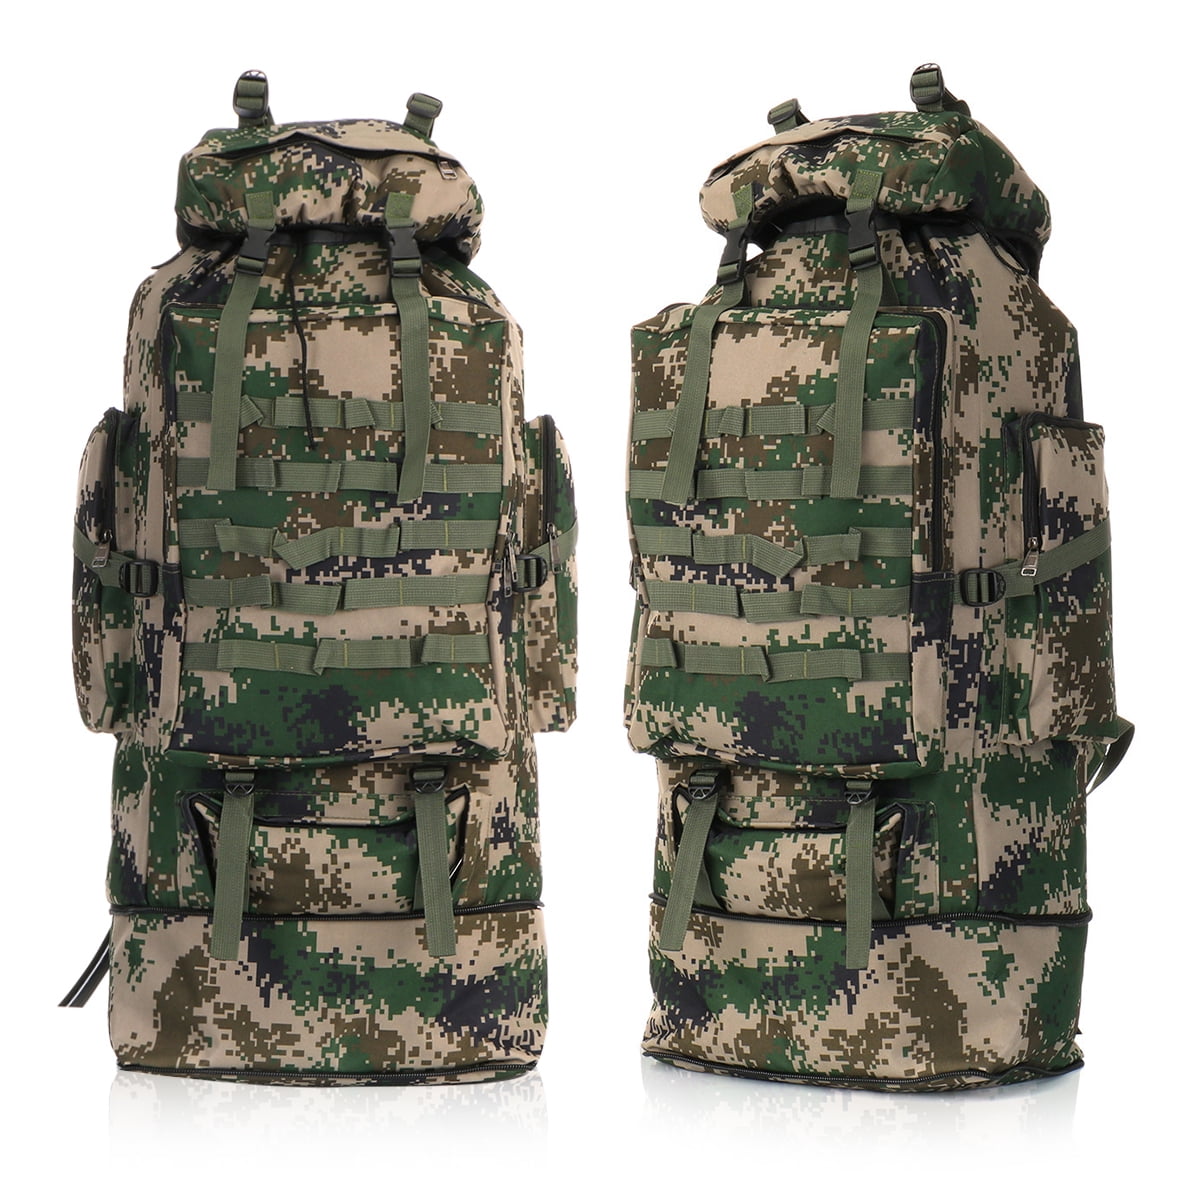 70L Military Tactical Army Backpack Rucksack Hiking Camping Trekking Bag Outdoor